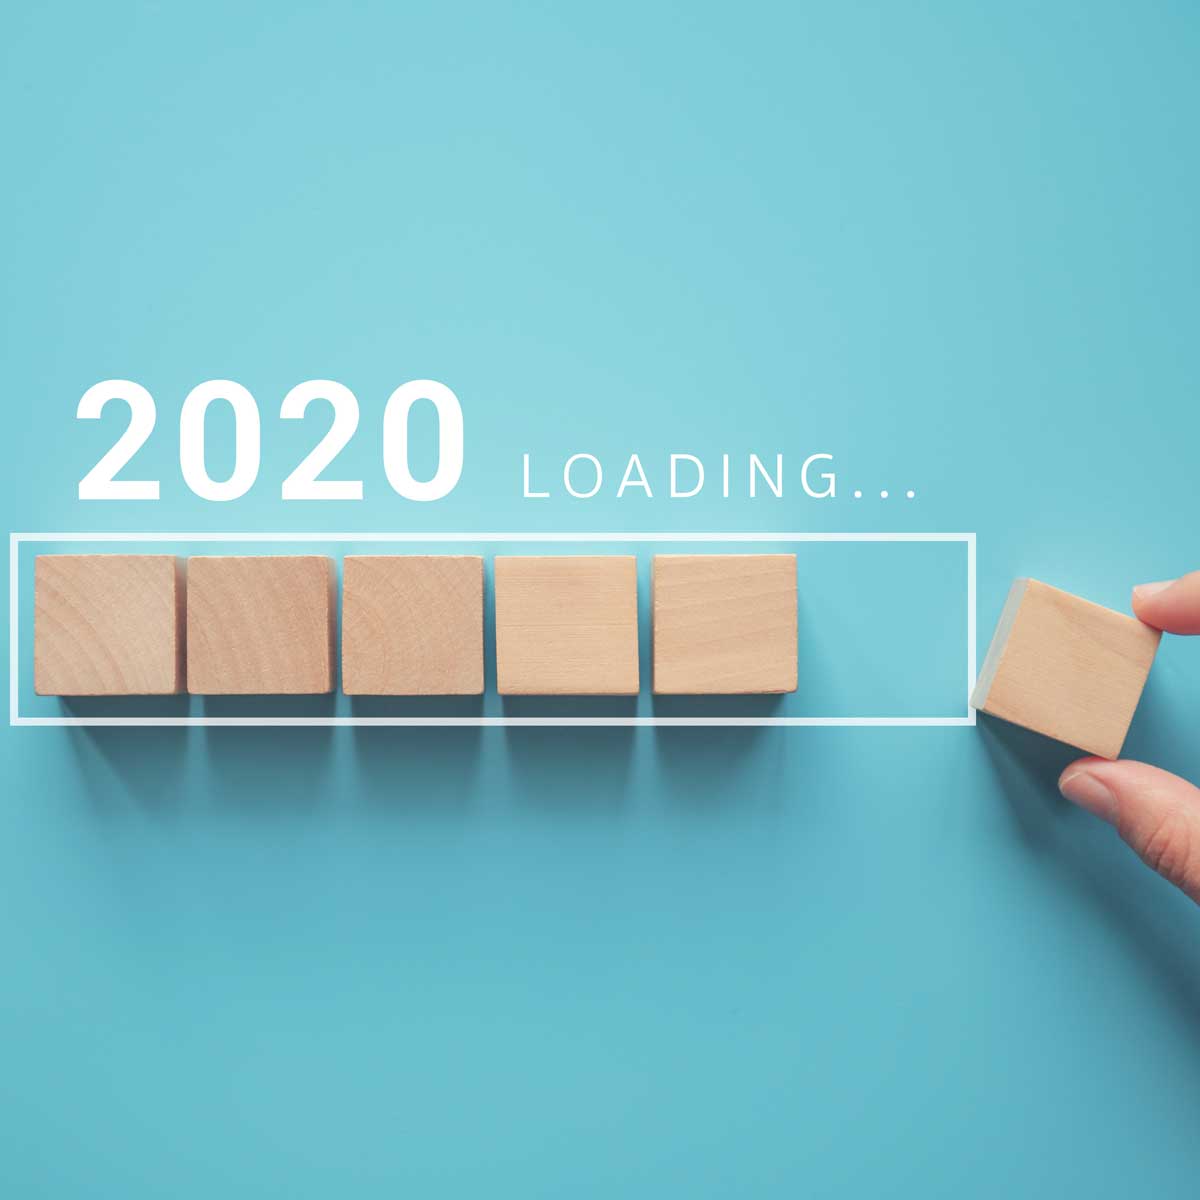 Loading new year 2020 with hand putting wood cube in progress bar.